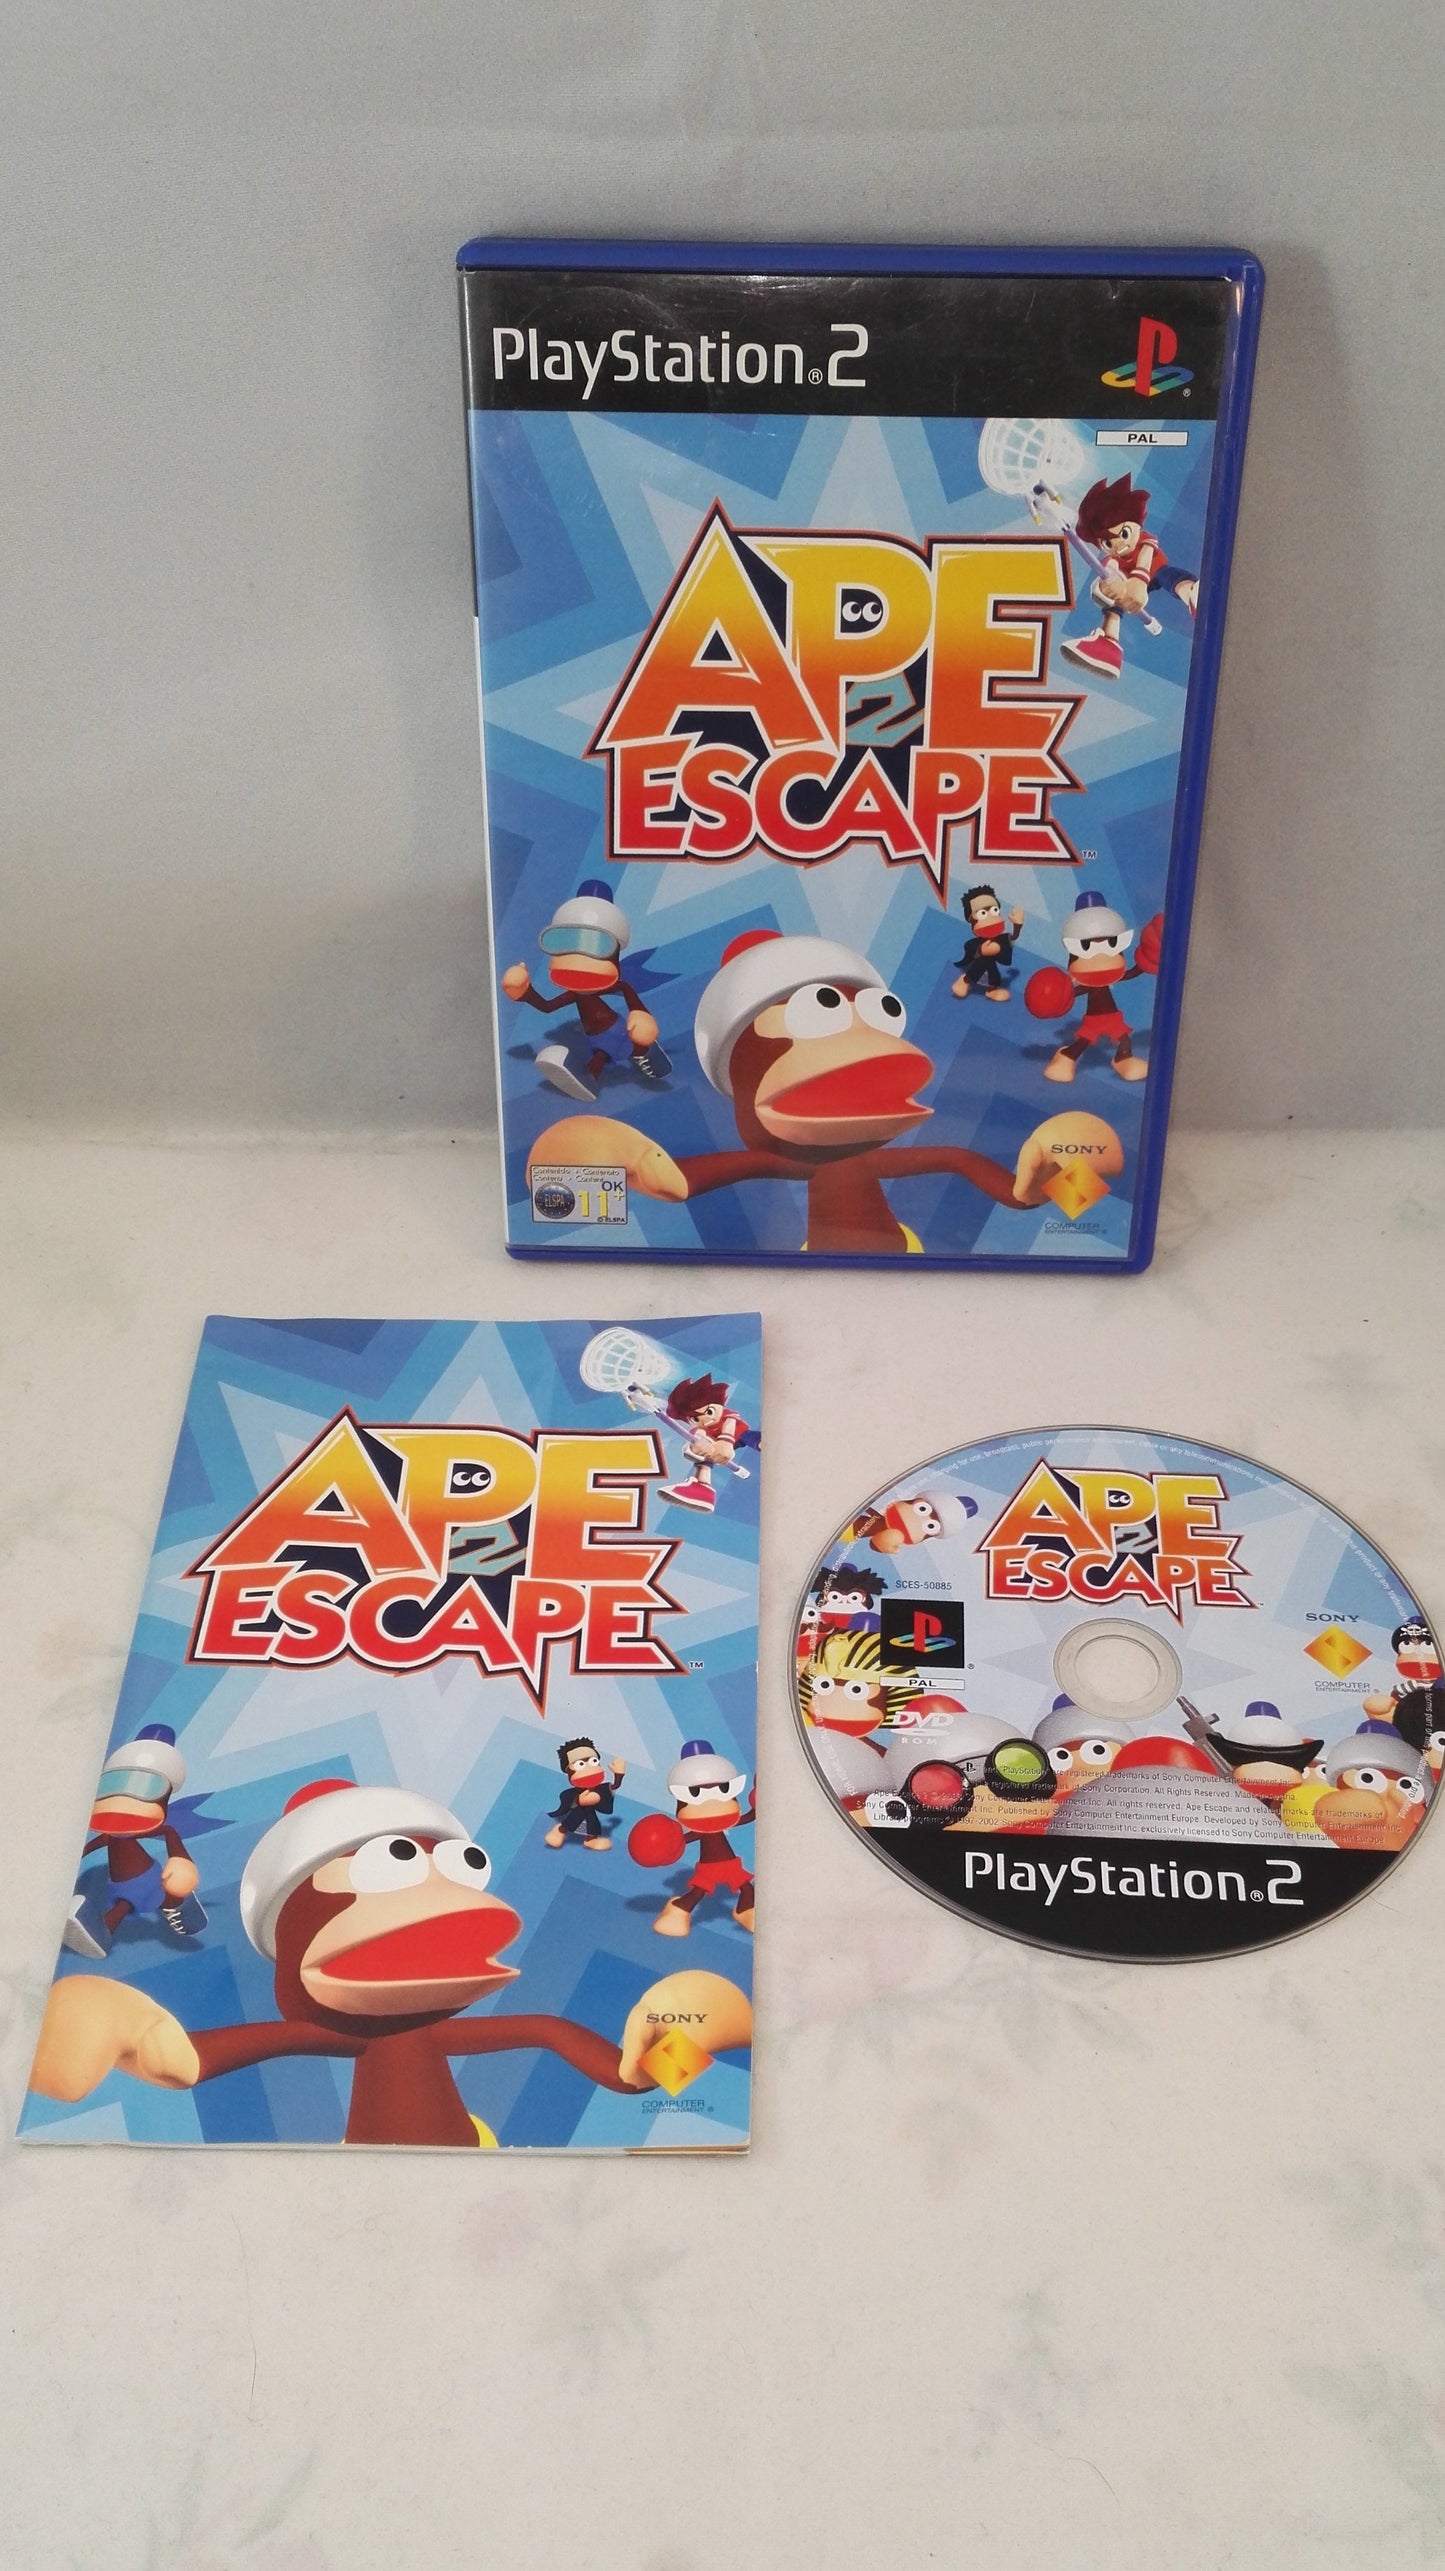 Ape Escape 2 PS2 (Sony Playstation 2) game